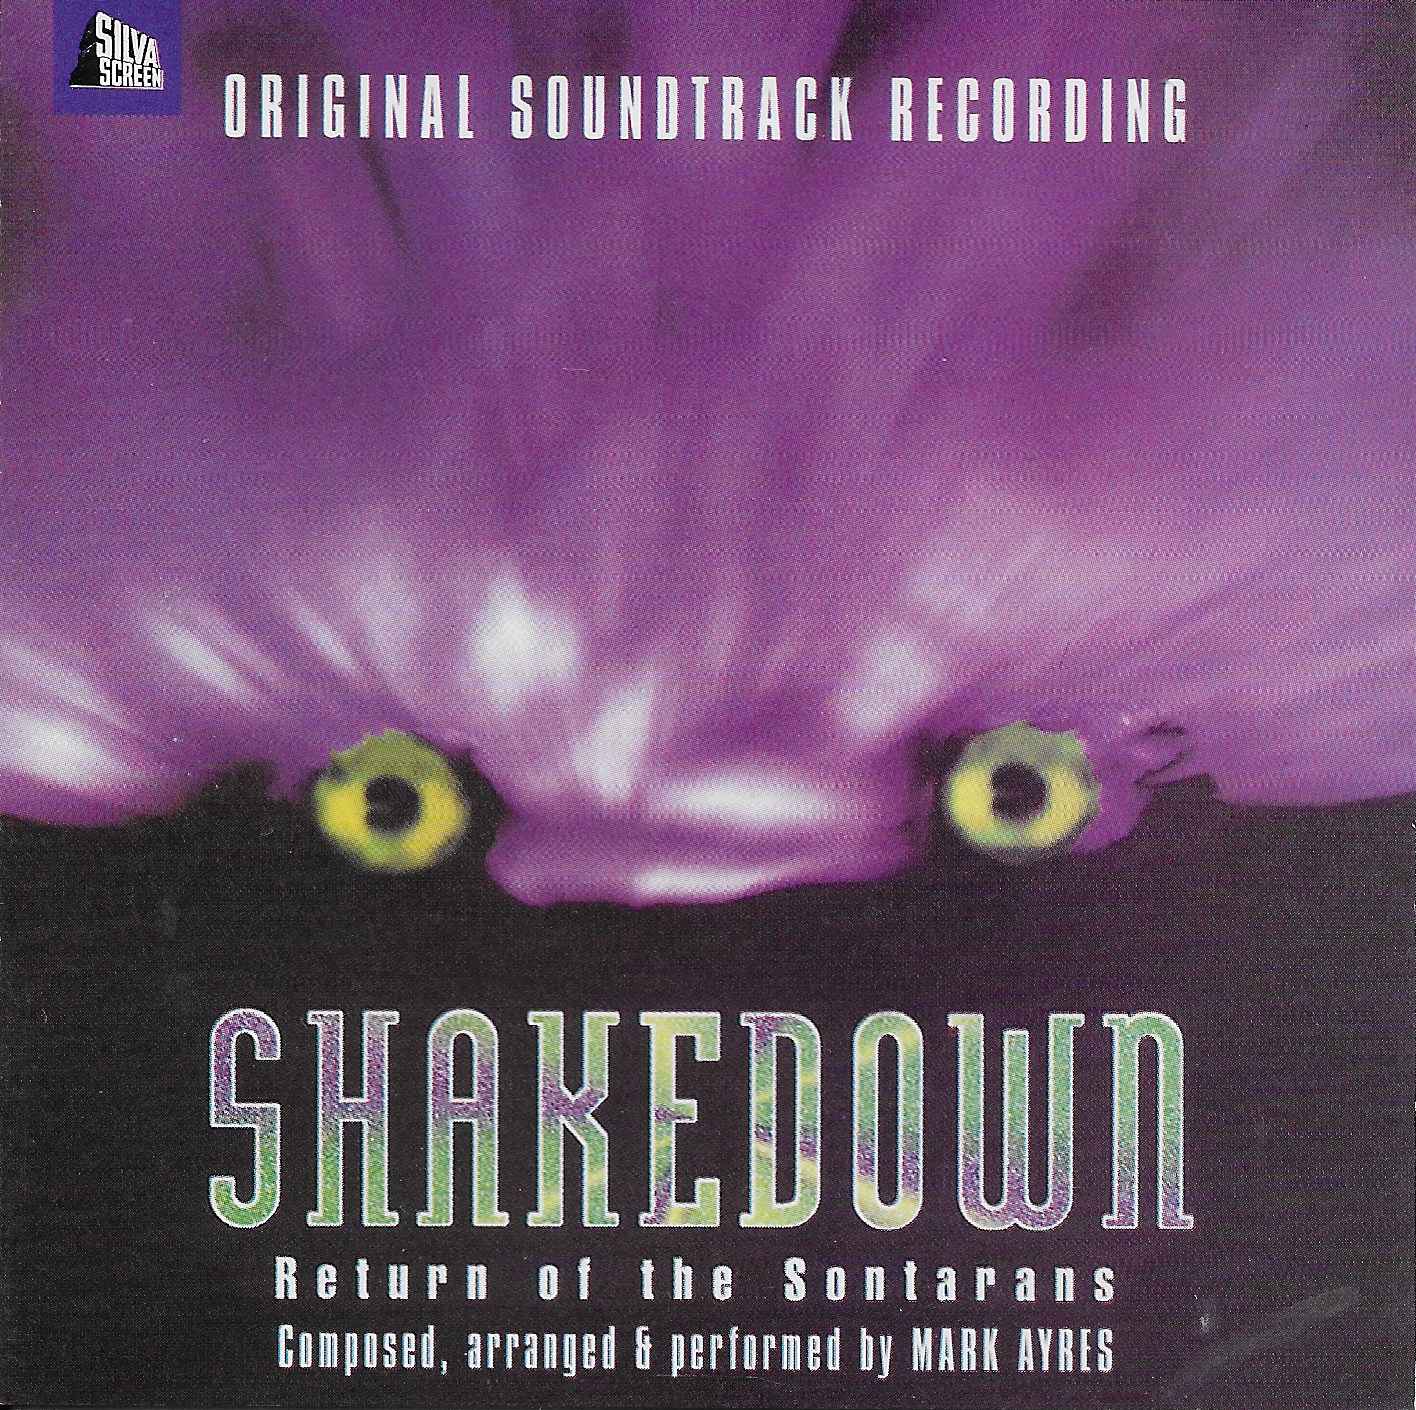 Picture of Shakedown by artist Mark Ayres from the BBC cds - Records and Tapes library